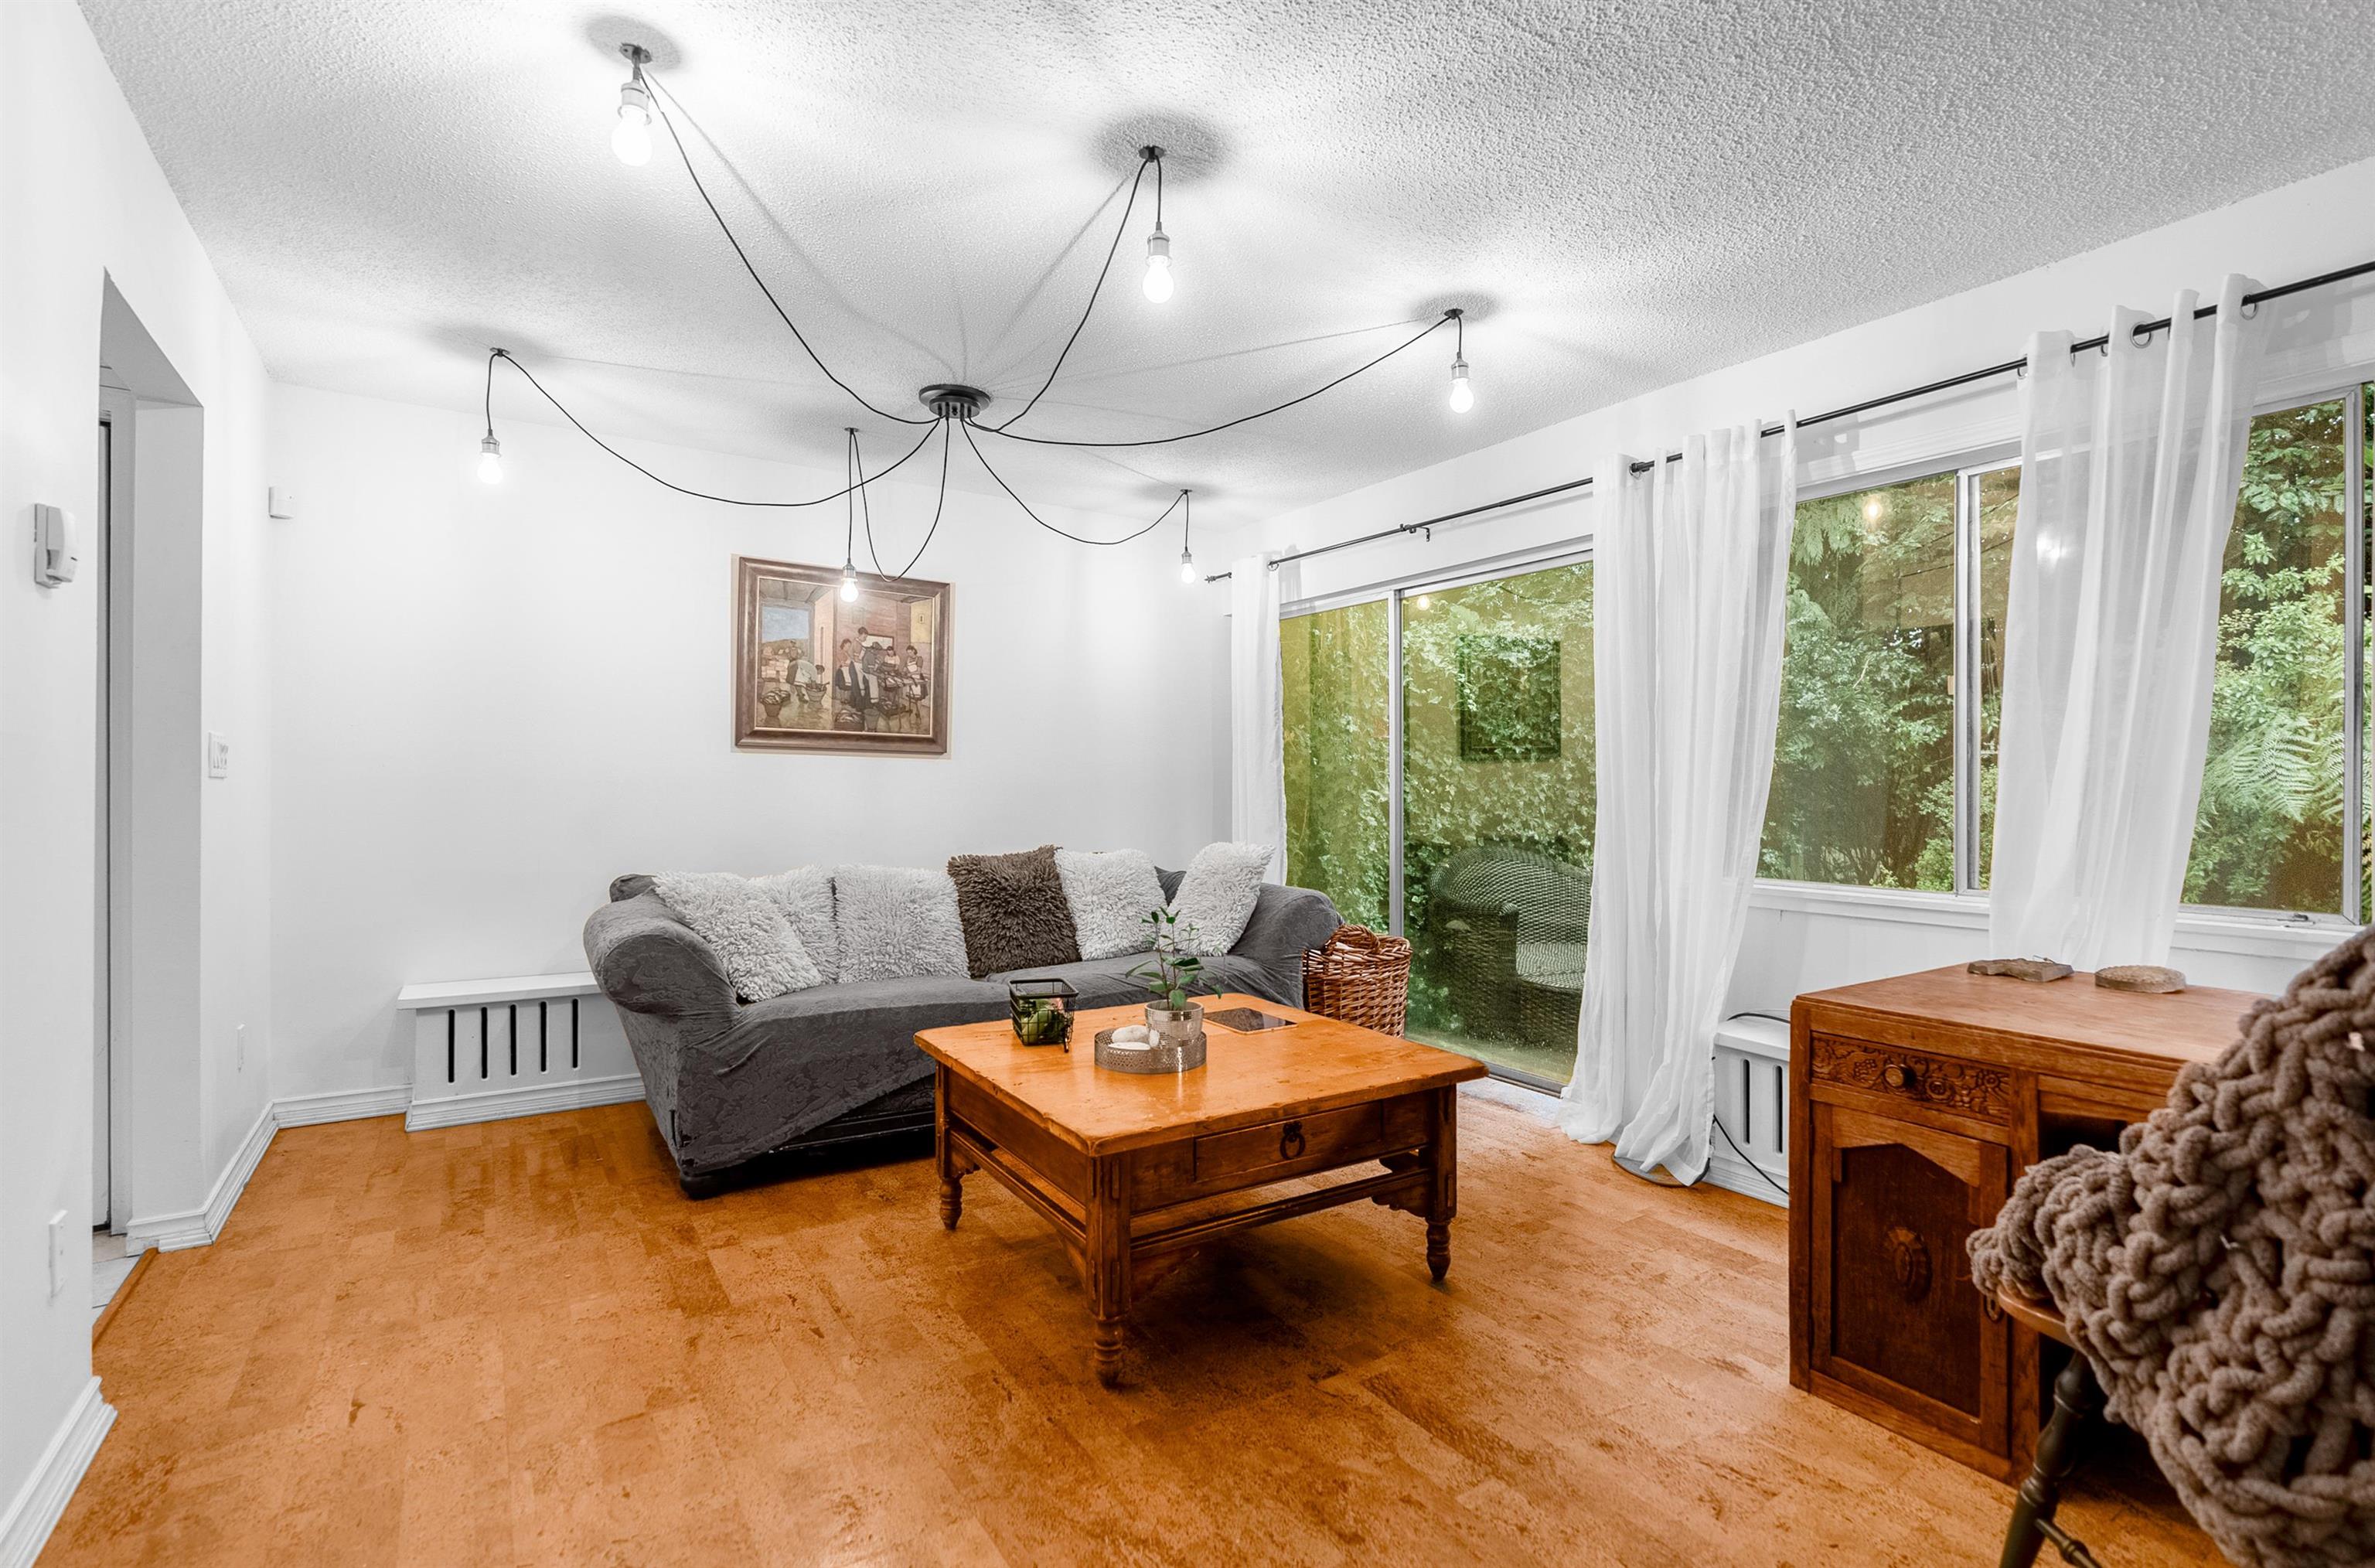 Listing image of 941 WESTVIEW CRESCENT